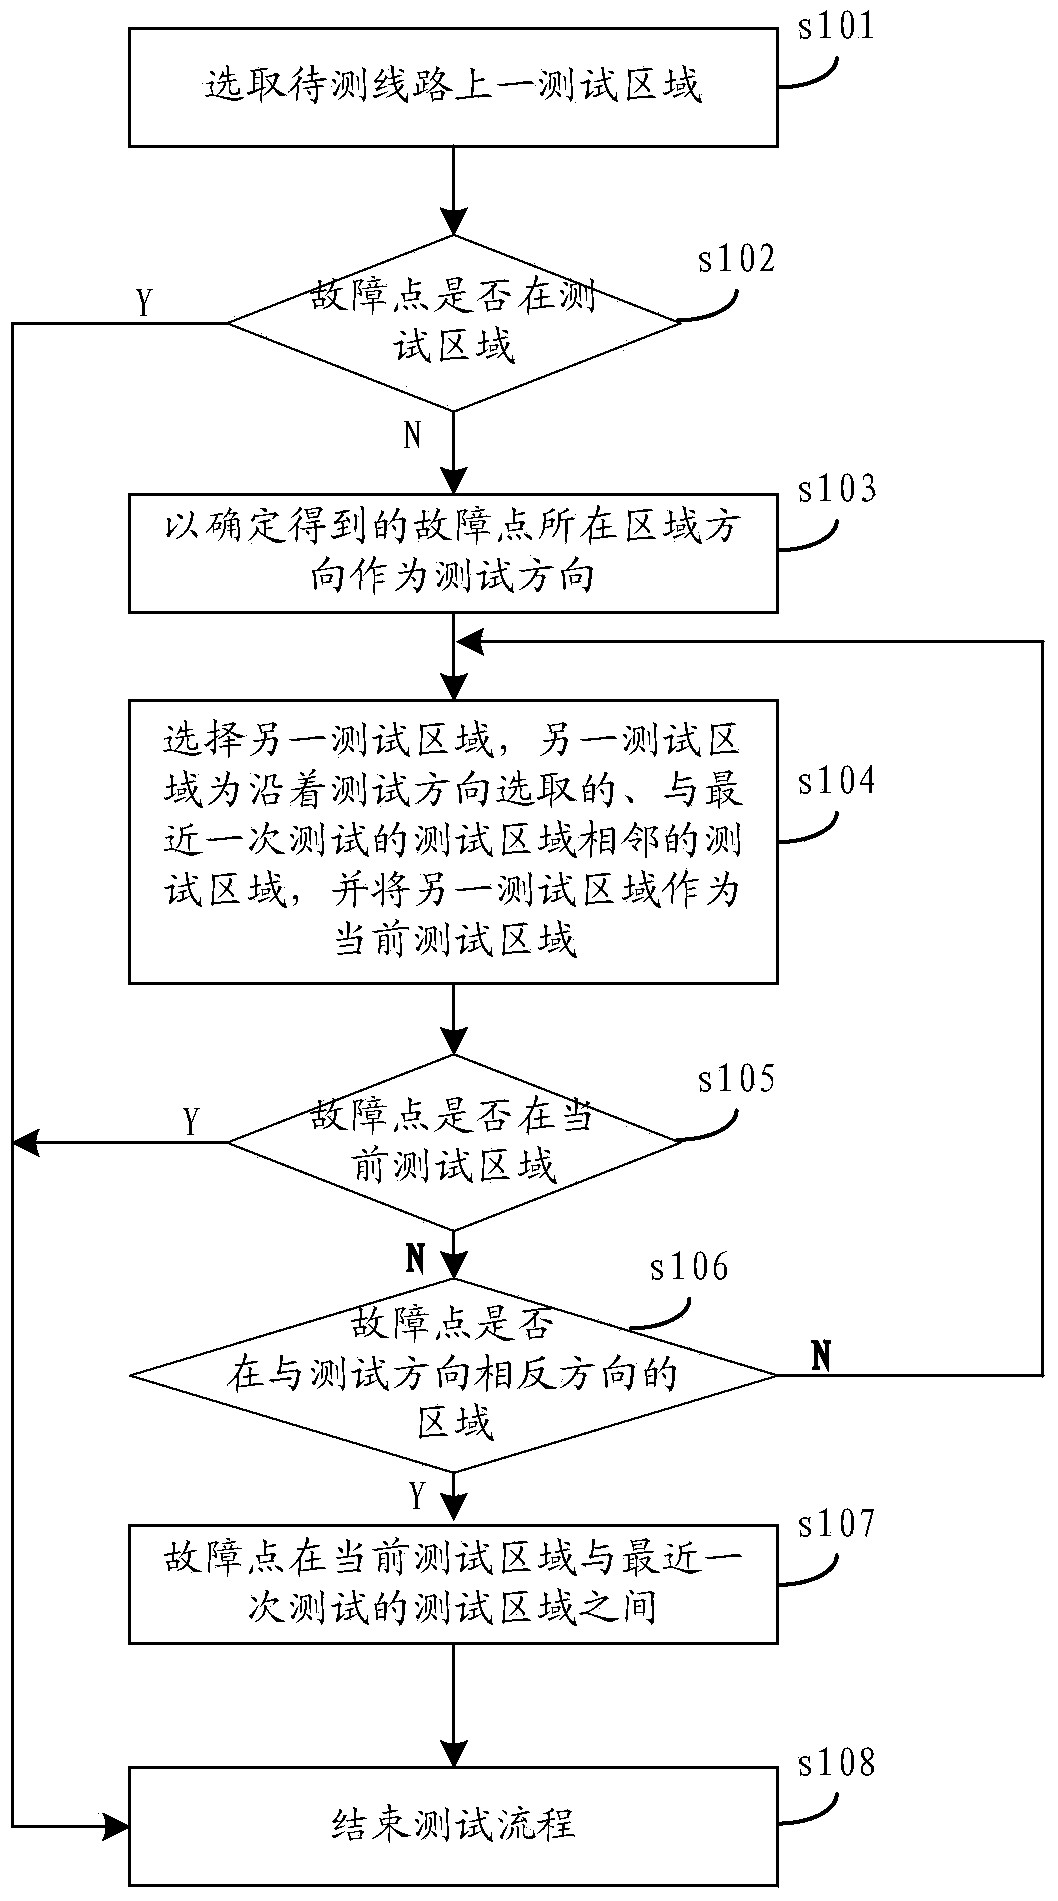 Positioning method for single-phase earth fault sections of isolated neutral system